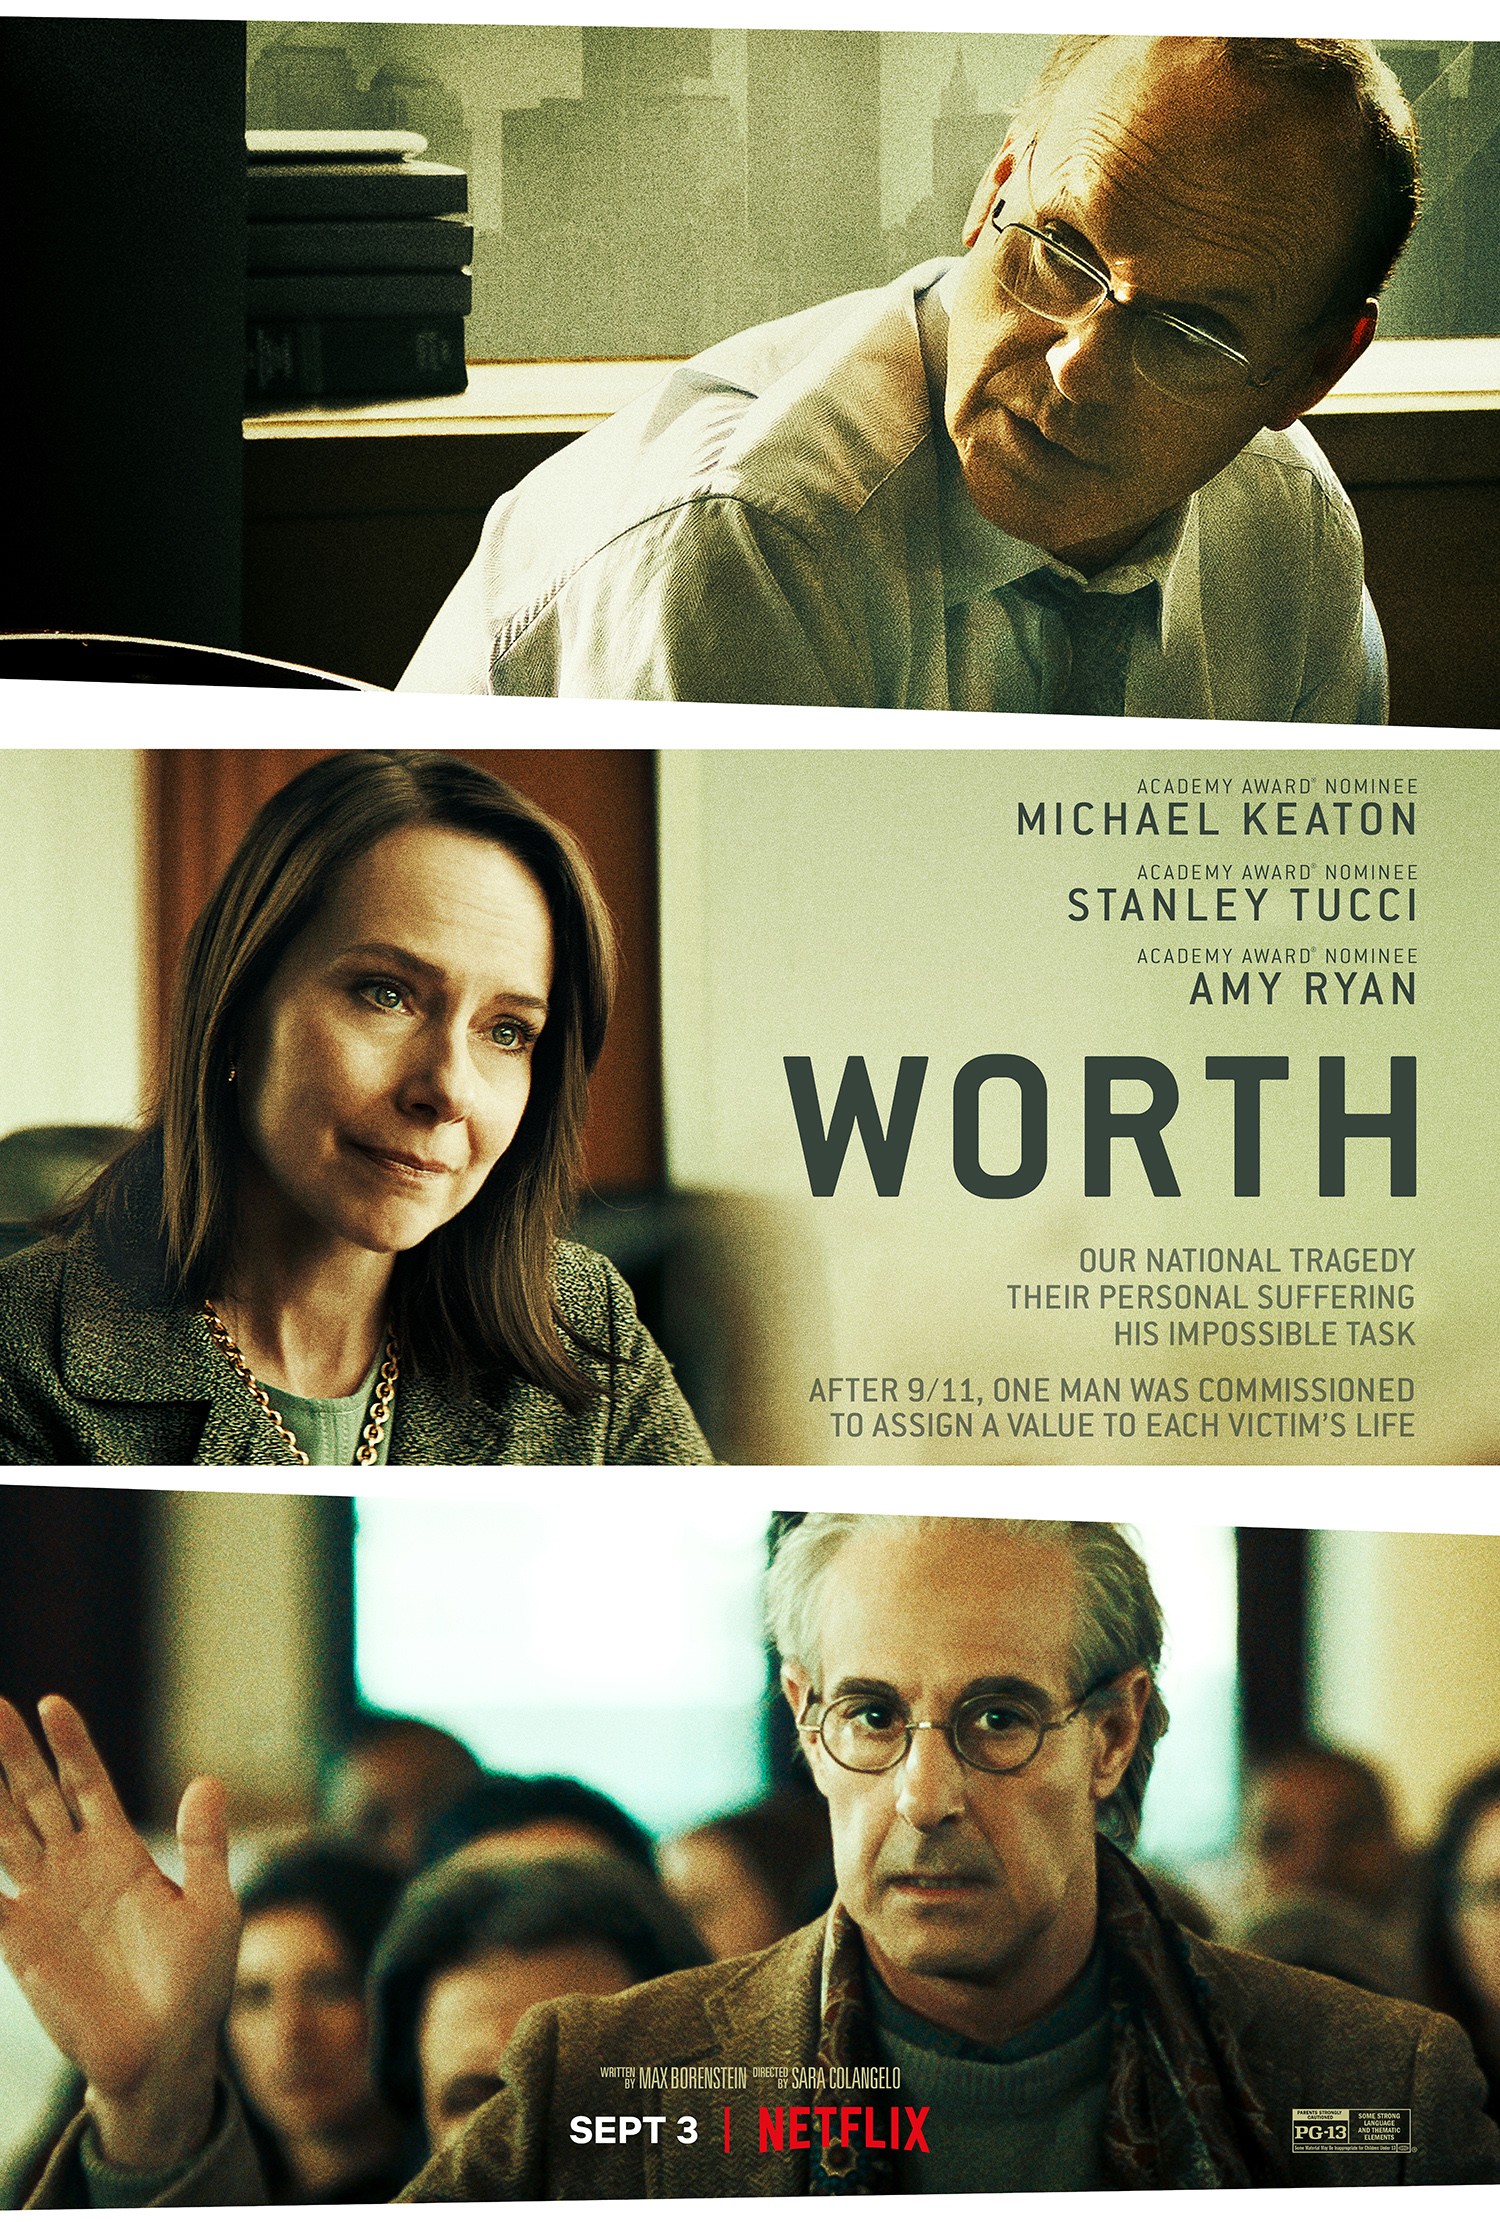 WORTH, (aka WHAT IS LIFE WORTH), US poster, from top: Michael Keaton, Amy Ryan, Stanley Tucci, 2020